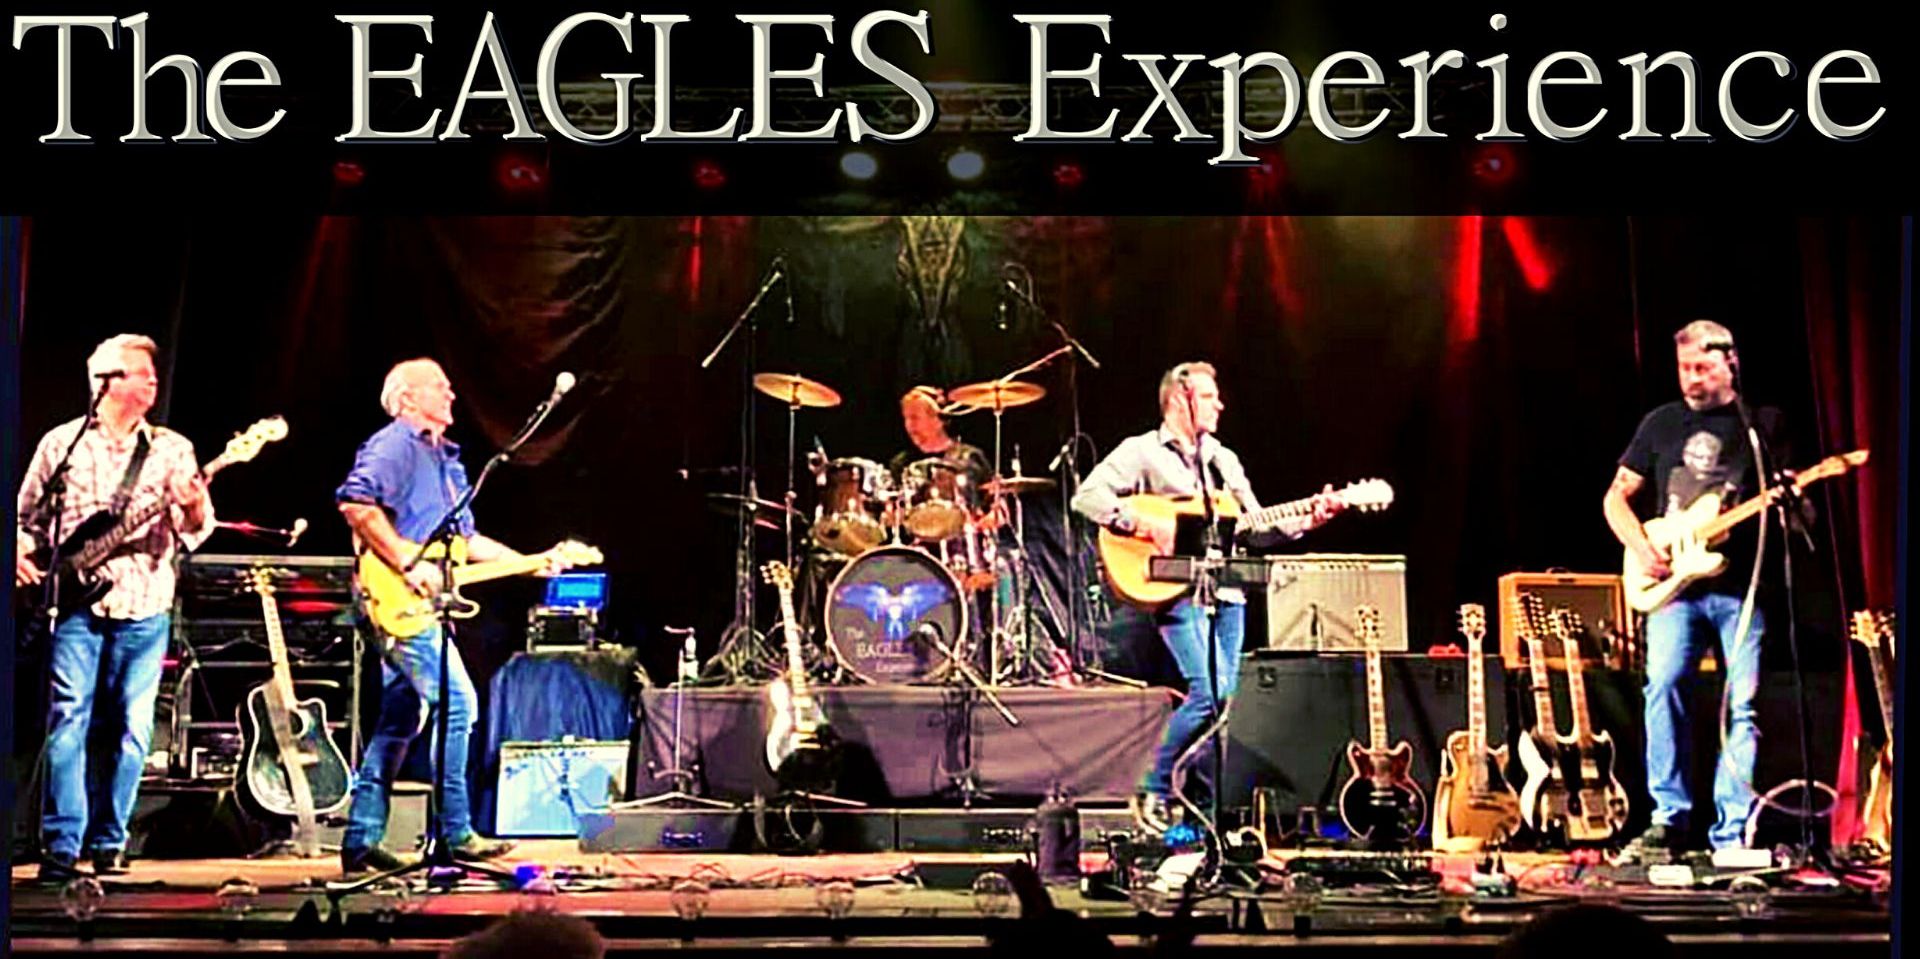 The Eagles Experience promotional image